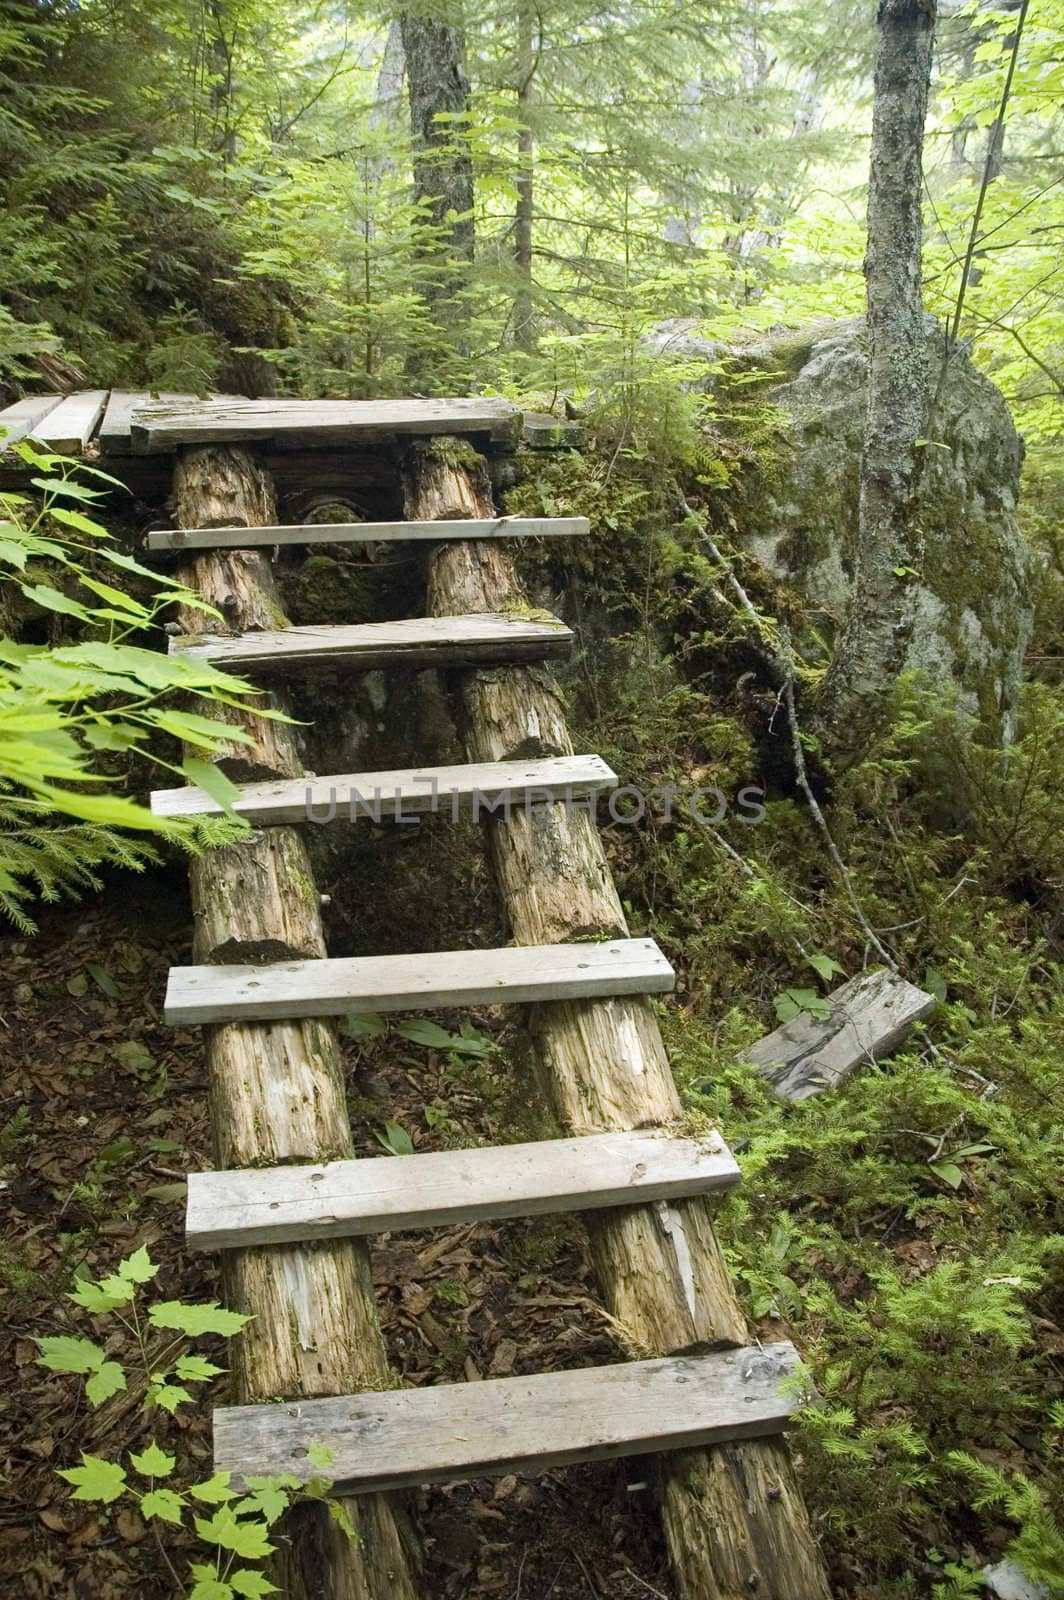 Wood stairs made to cross an accidented forest trail